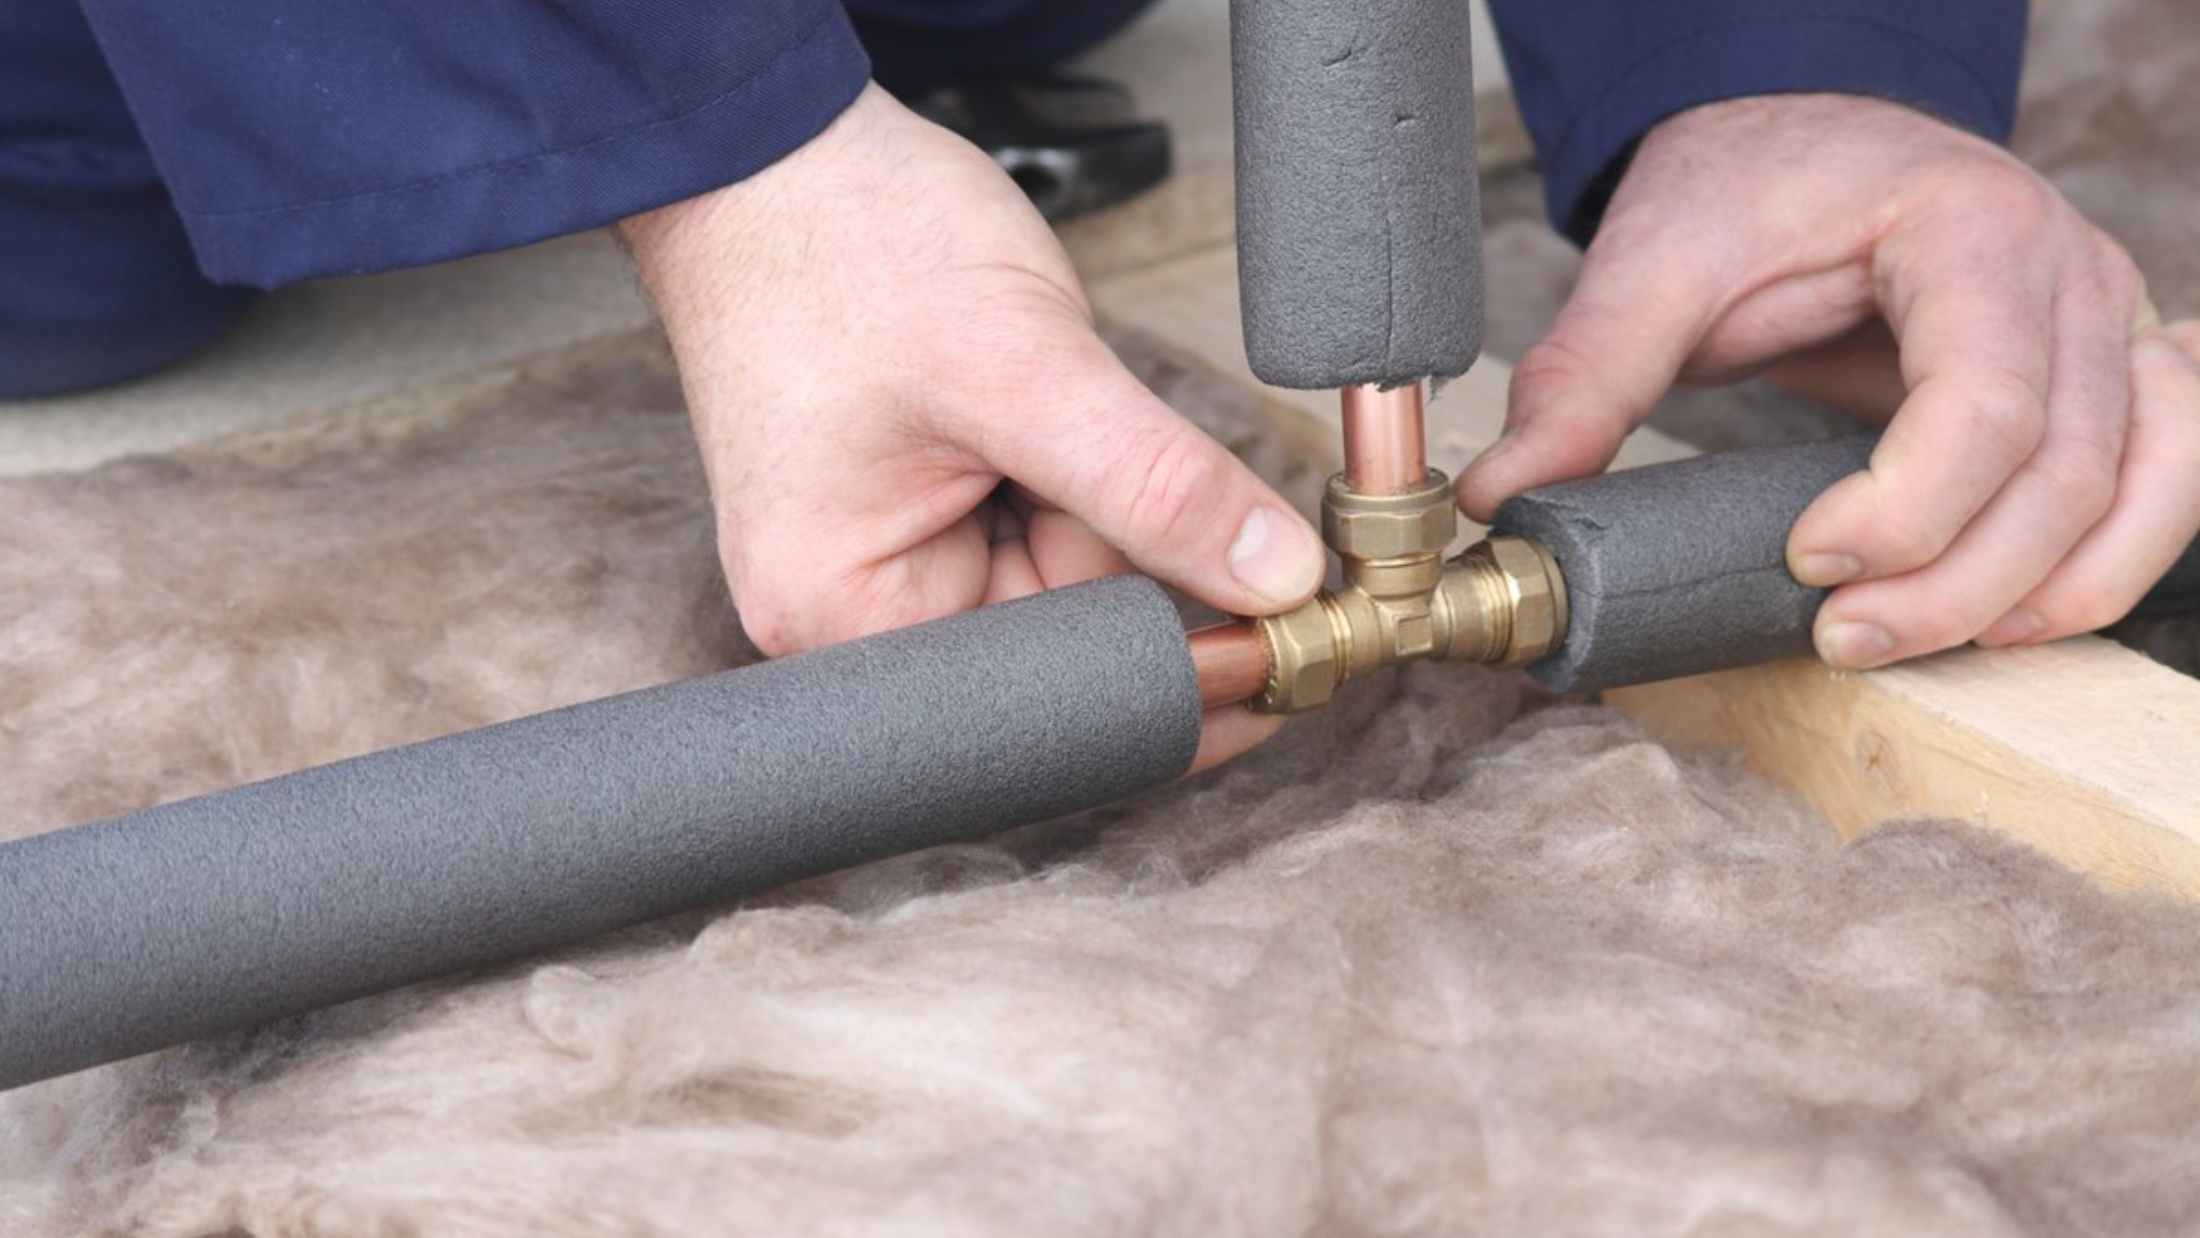 Plumber connecting copper water pipes